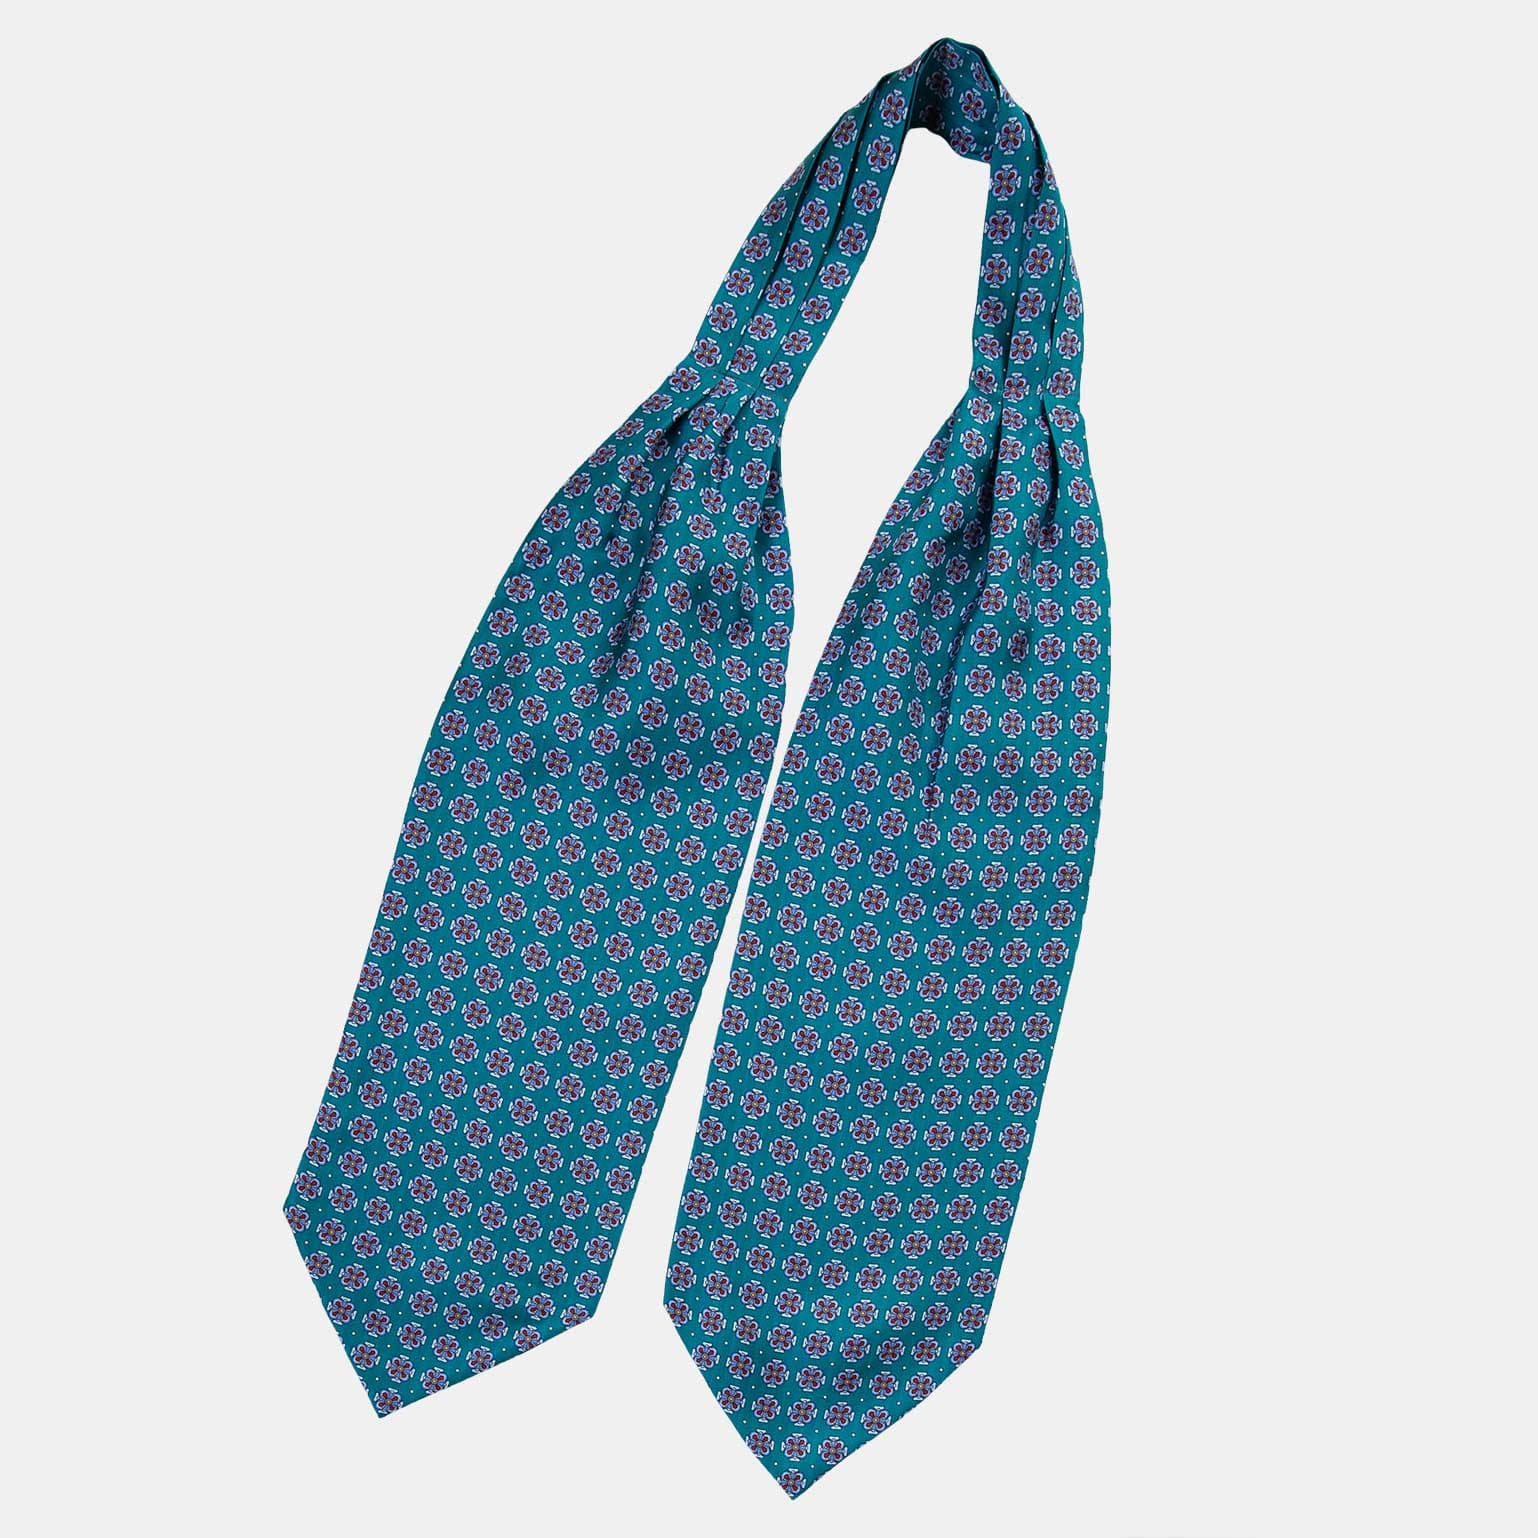 Teal Green Silk Ascot Tie - Made in Italy